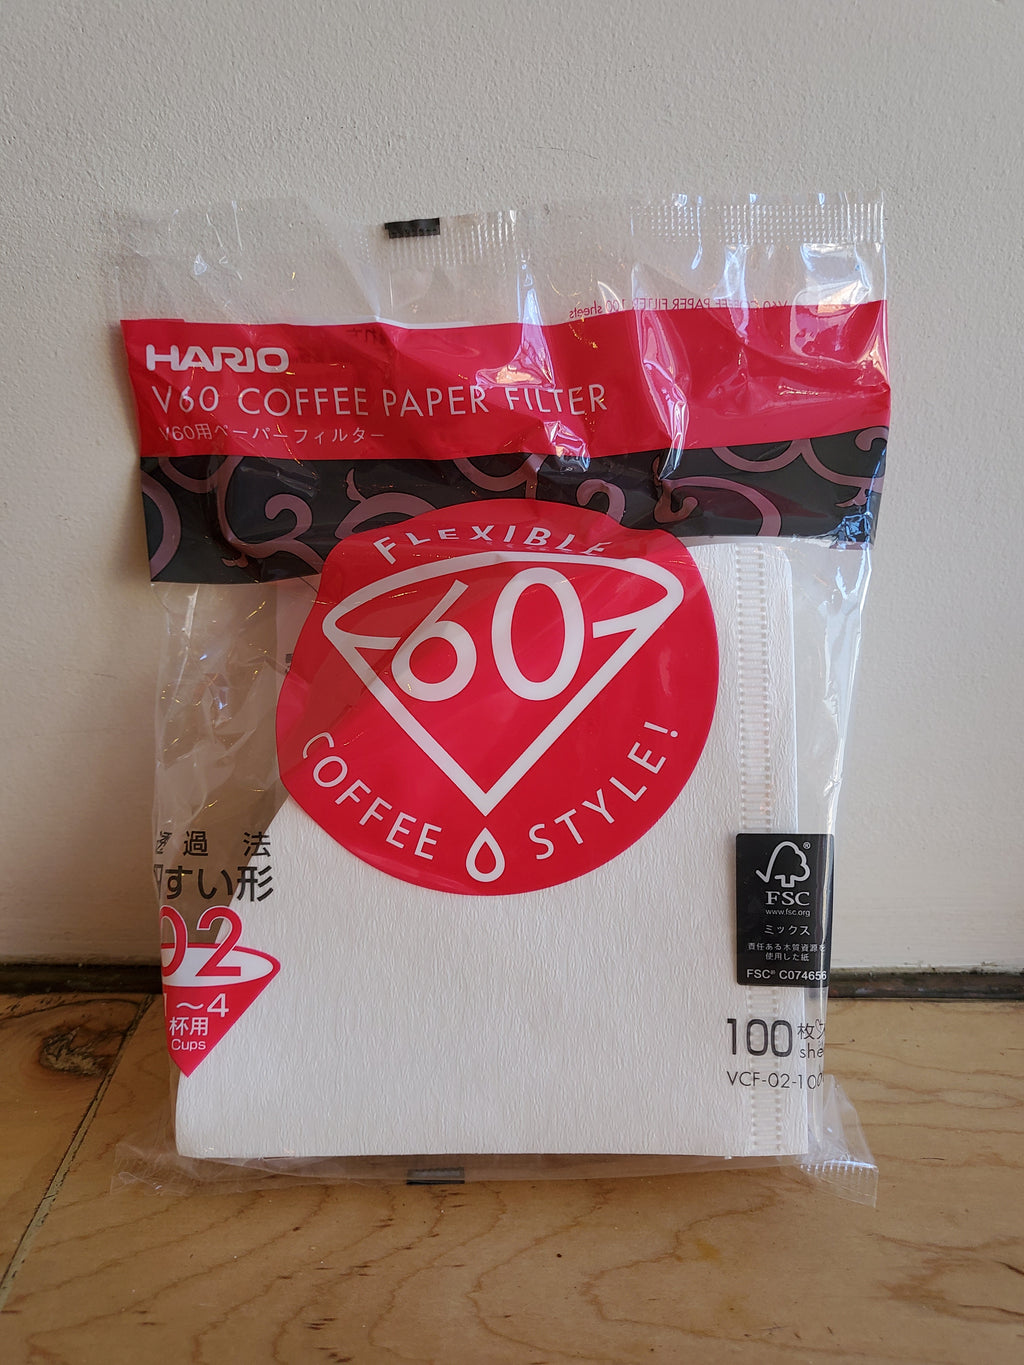 * Brewing Equipment - Hario V60-02 Dripper Pourover Paper Filters